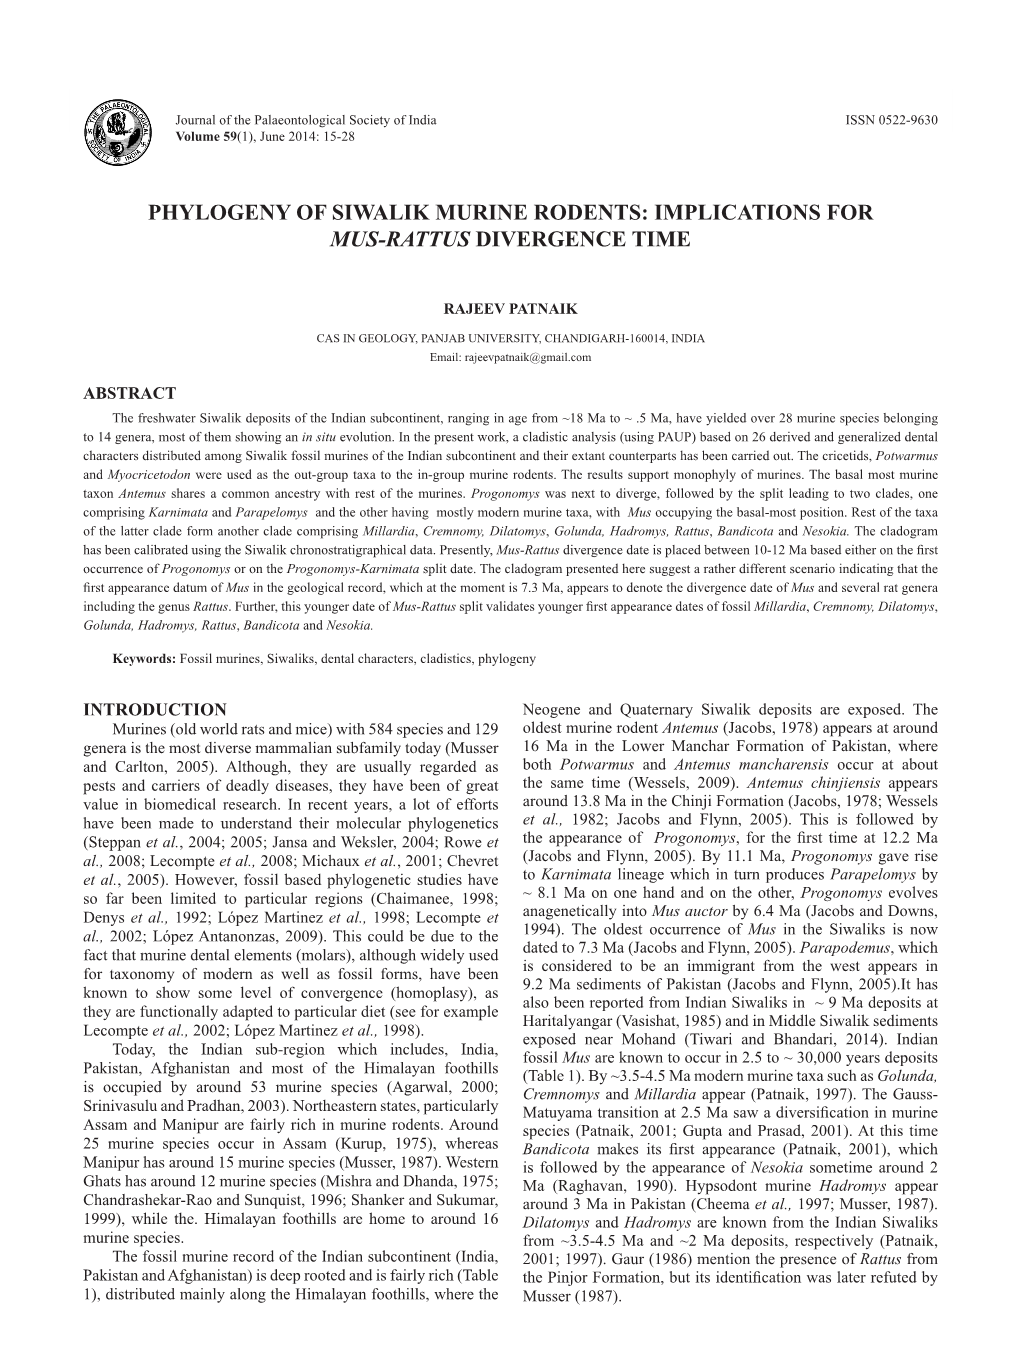 PHYLOGENY of SIWALIK MURINE RODENTS 15 Journal of the Palaeontological Society of India ISSN 0522-9630 Volume 59(1), June 2014: 15-28